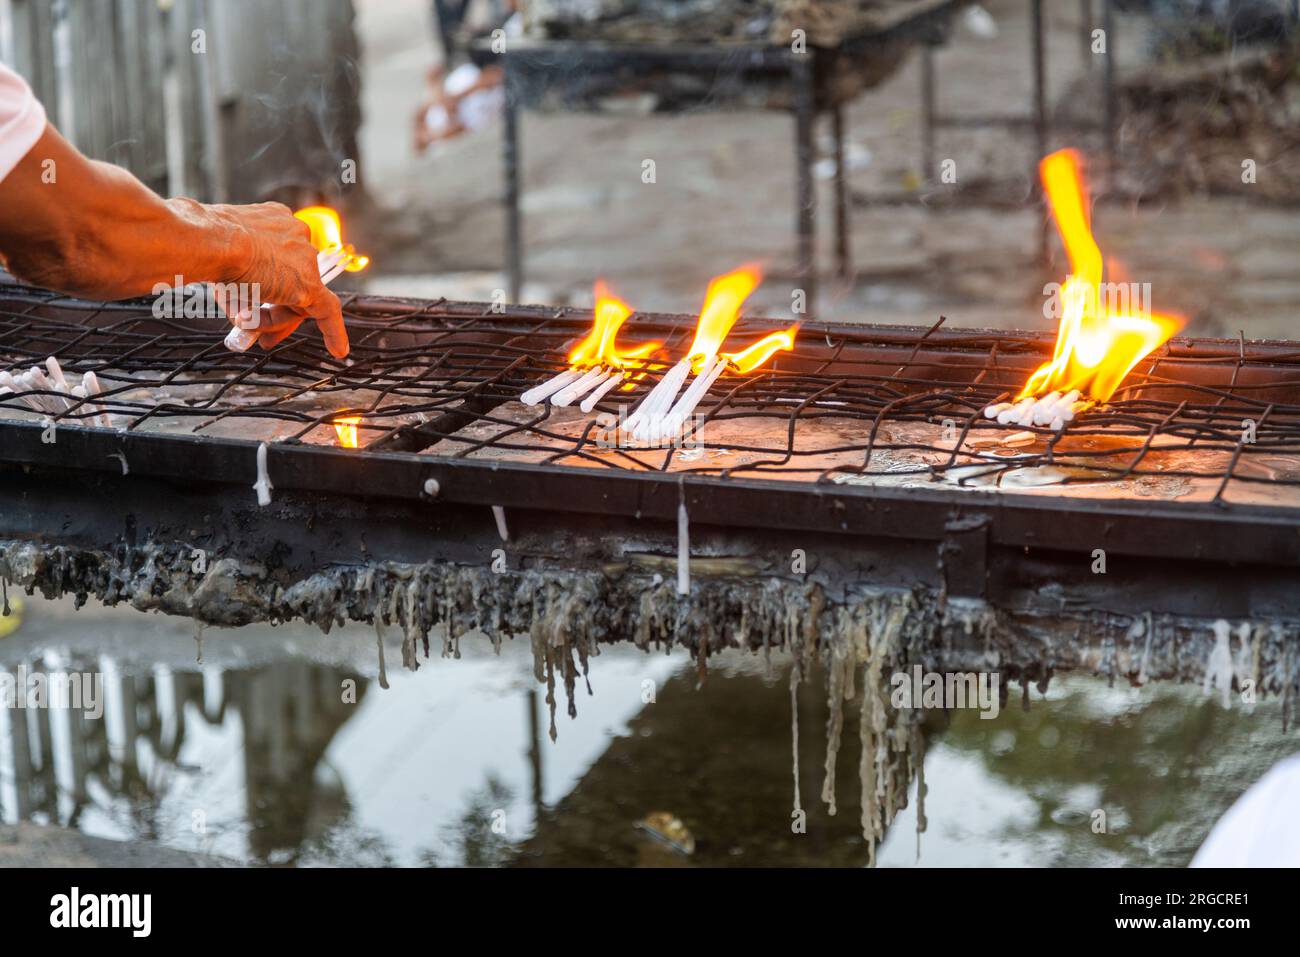 Large bright flames from burning candles,molten candle wax dripping from metal tray as people place and position them carefully as they pray to Jesus Stock Photo